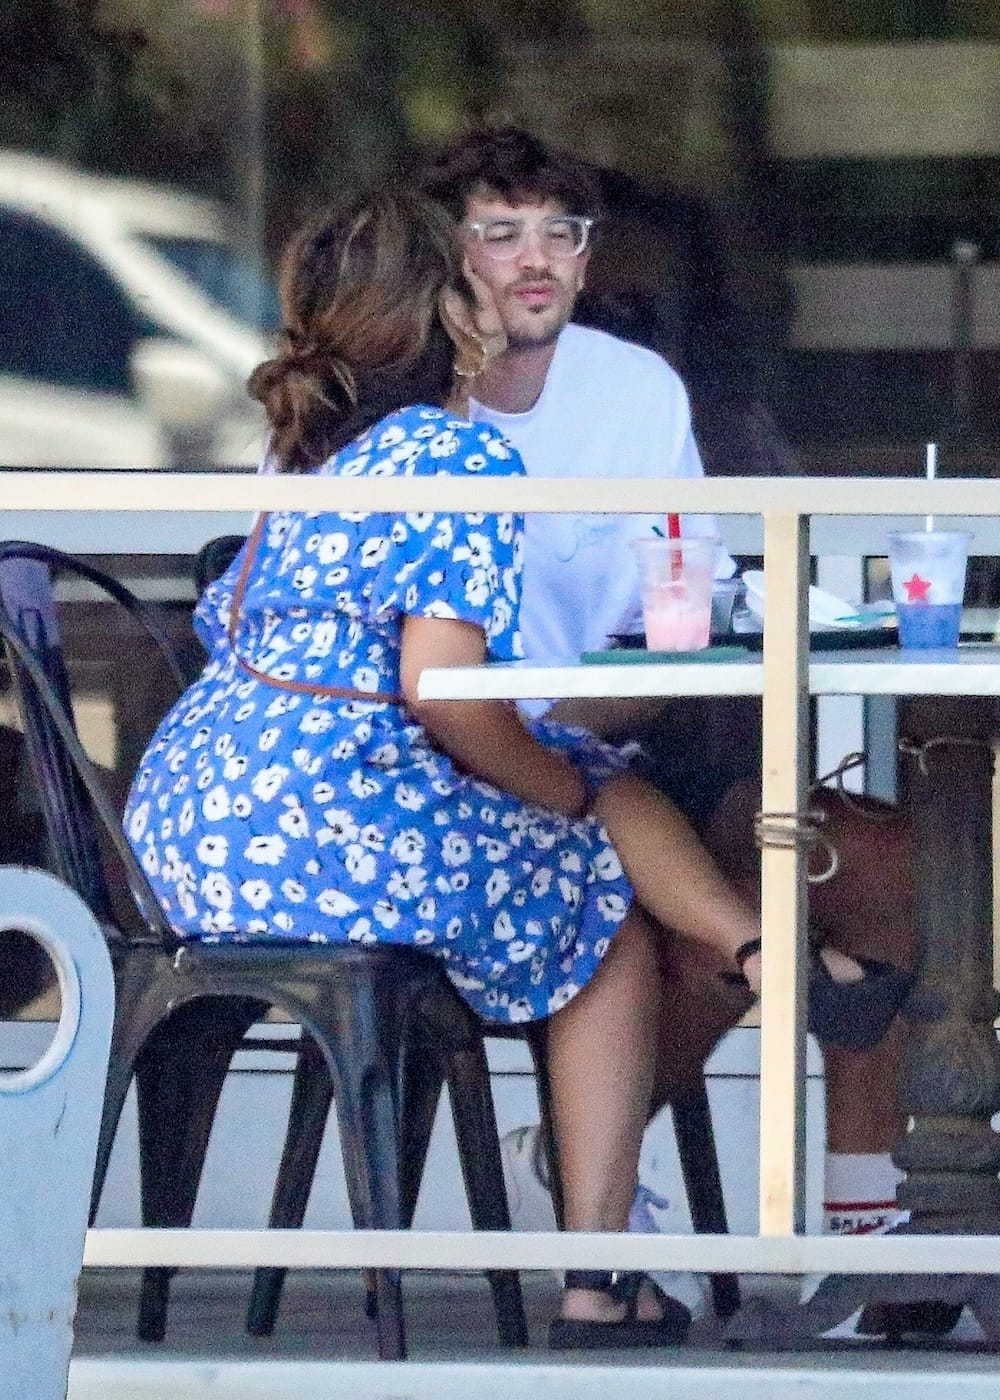 Camila Cabello kissed her new boyfriend Austin Kevitch on their PDA-filled romantic date in Los Angeles on August 7, 2022.